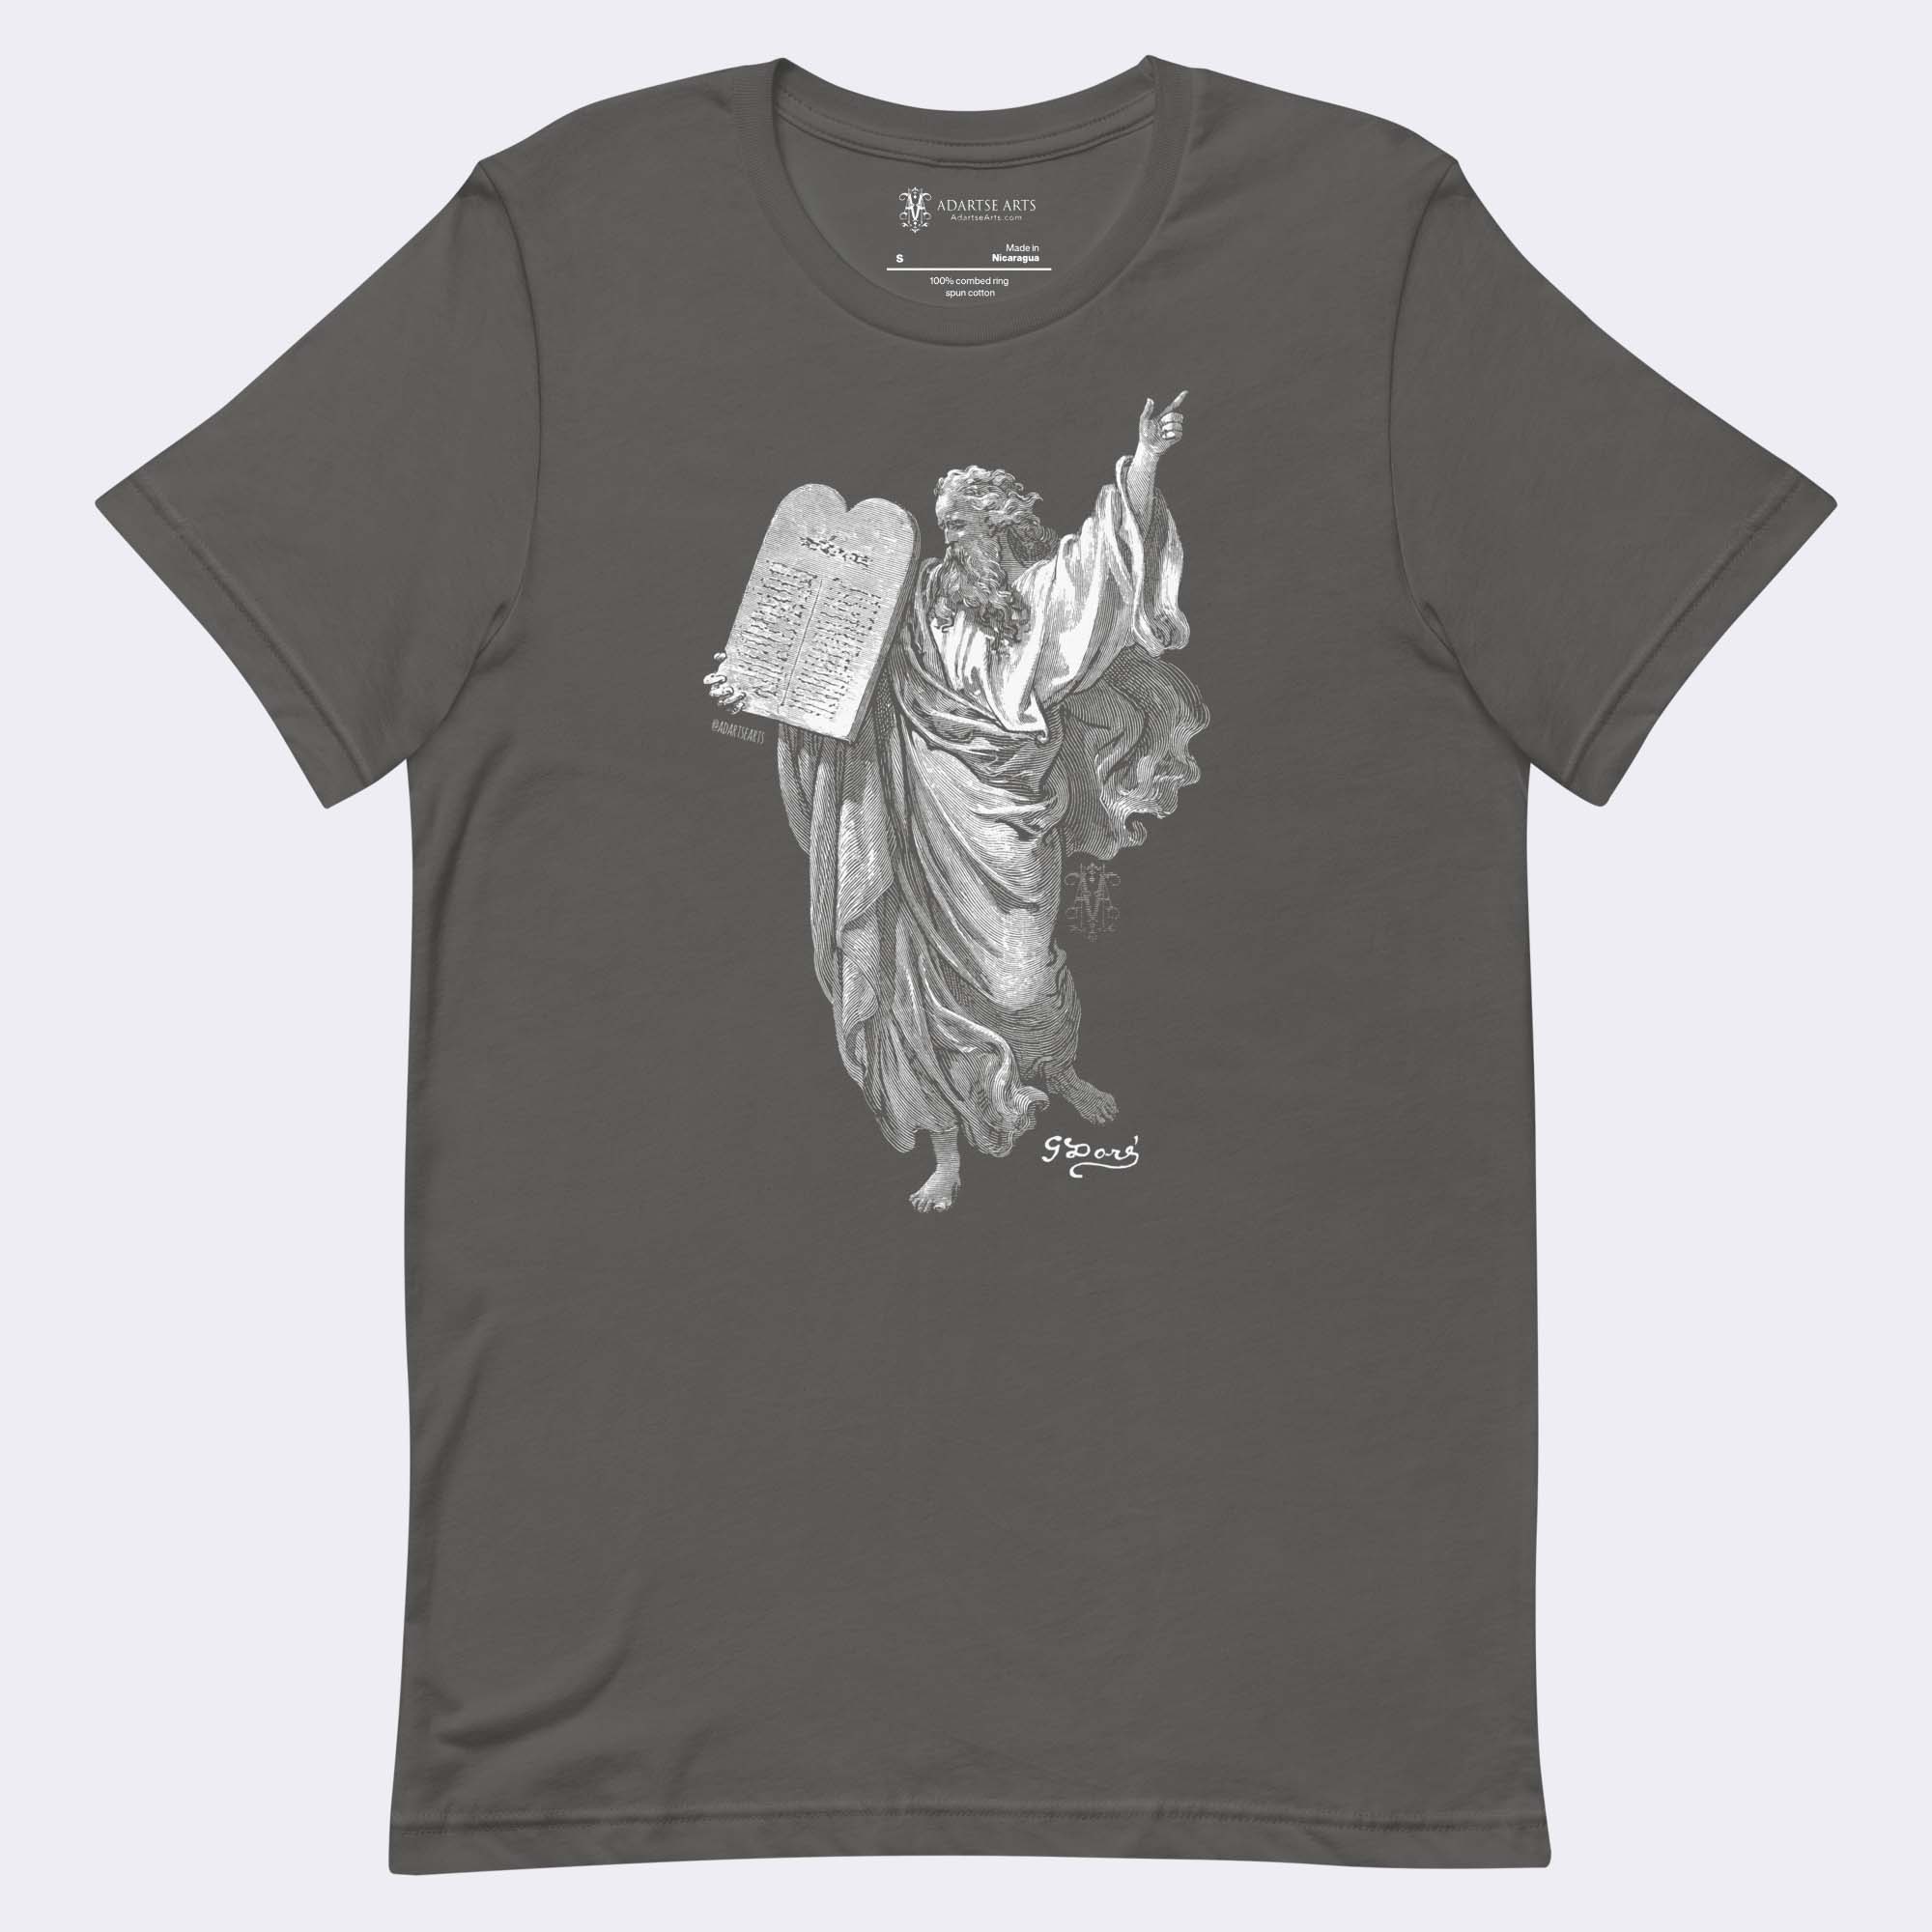 Premium Unisex Art T-Shirt of Moses Coming Down From Mount Sinai (1865) by Gustave Doré.